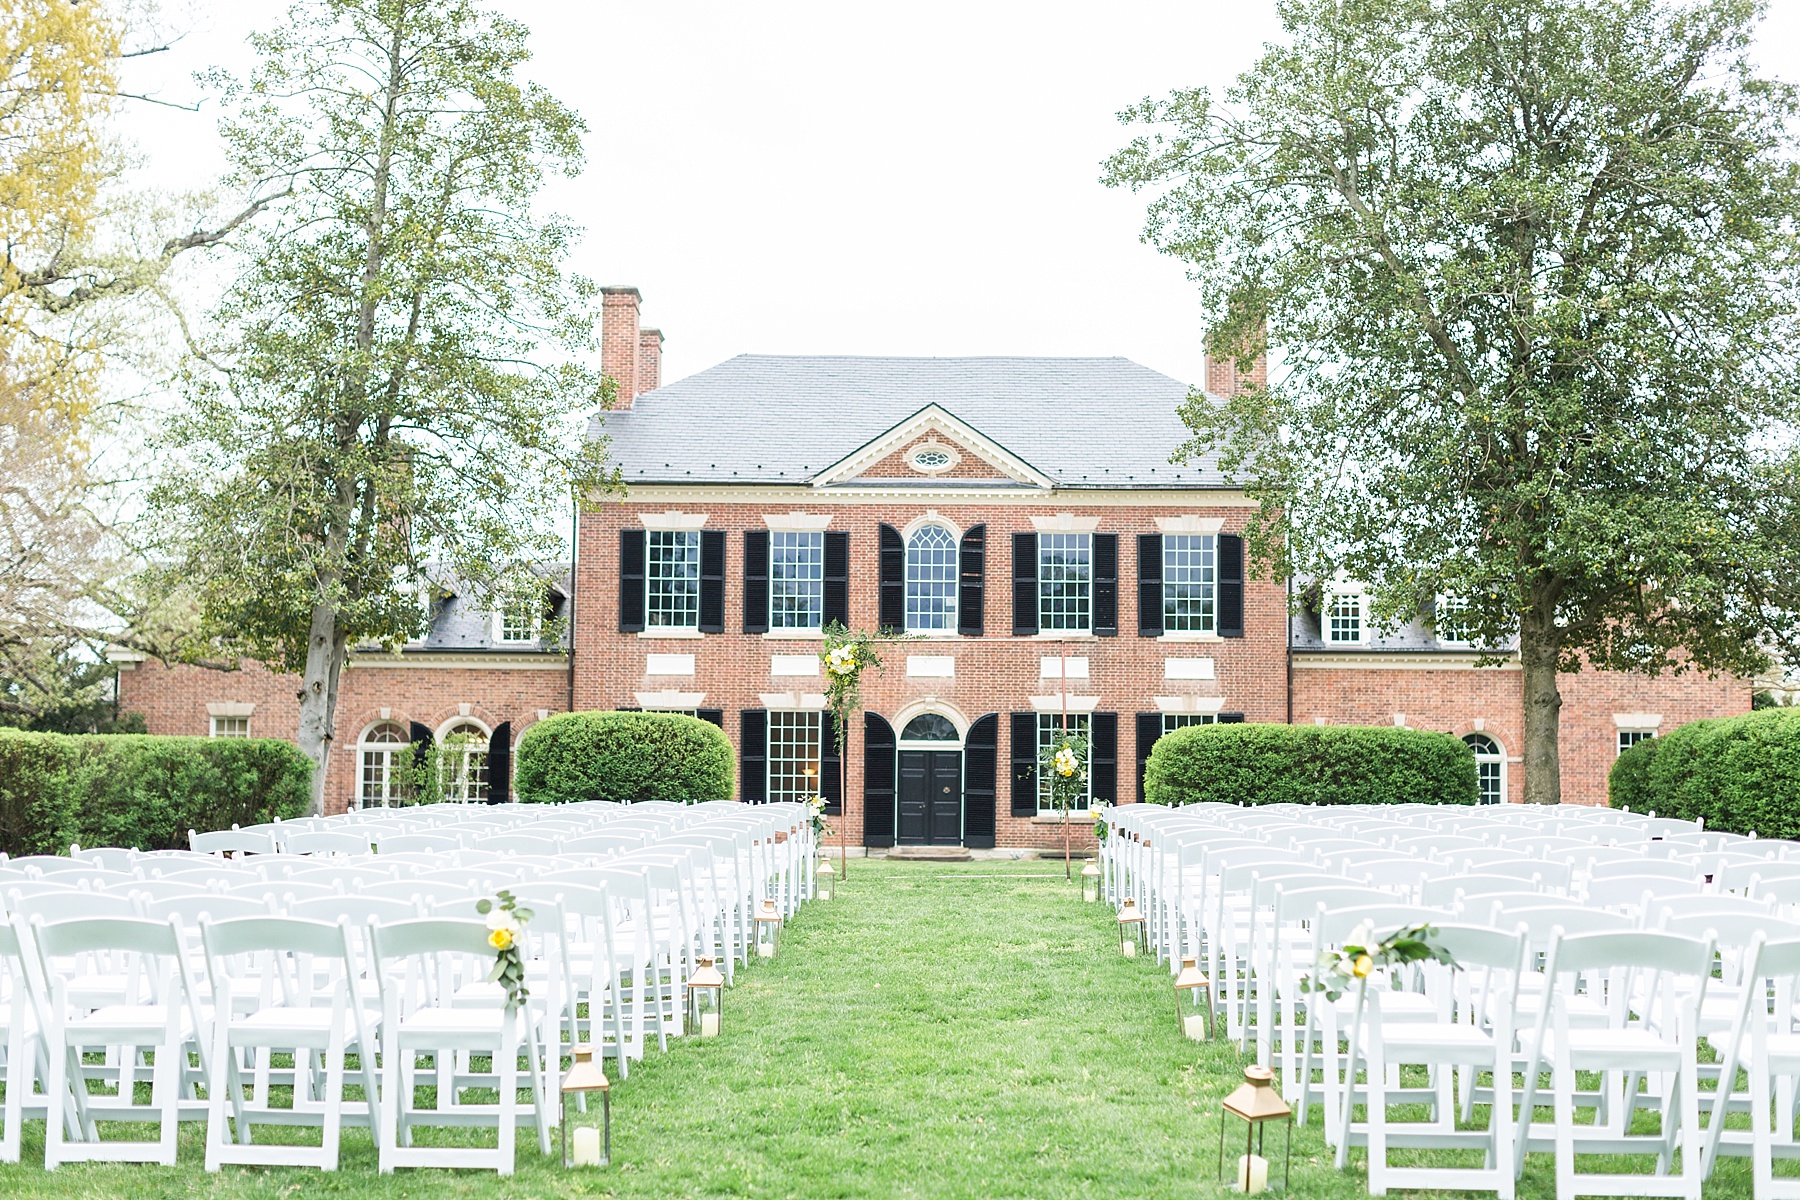 Woodlawn + Pope Leighy House wedding ceremony photographed by Alexandra Mandato Photography